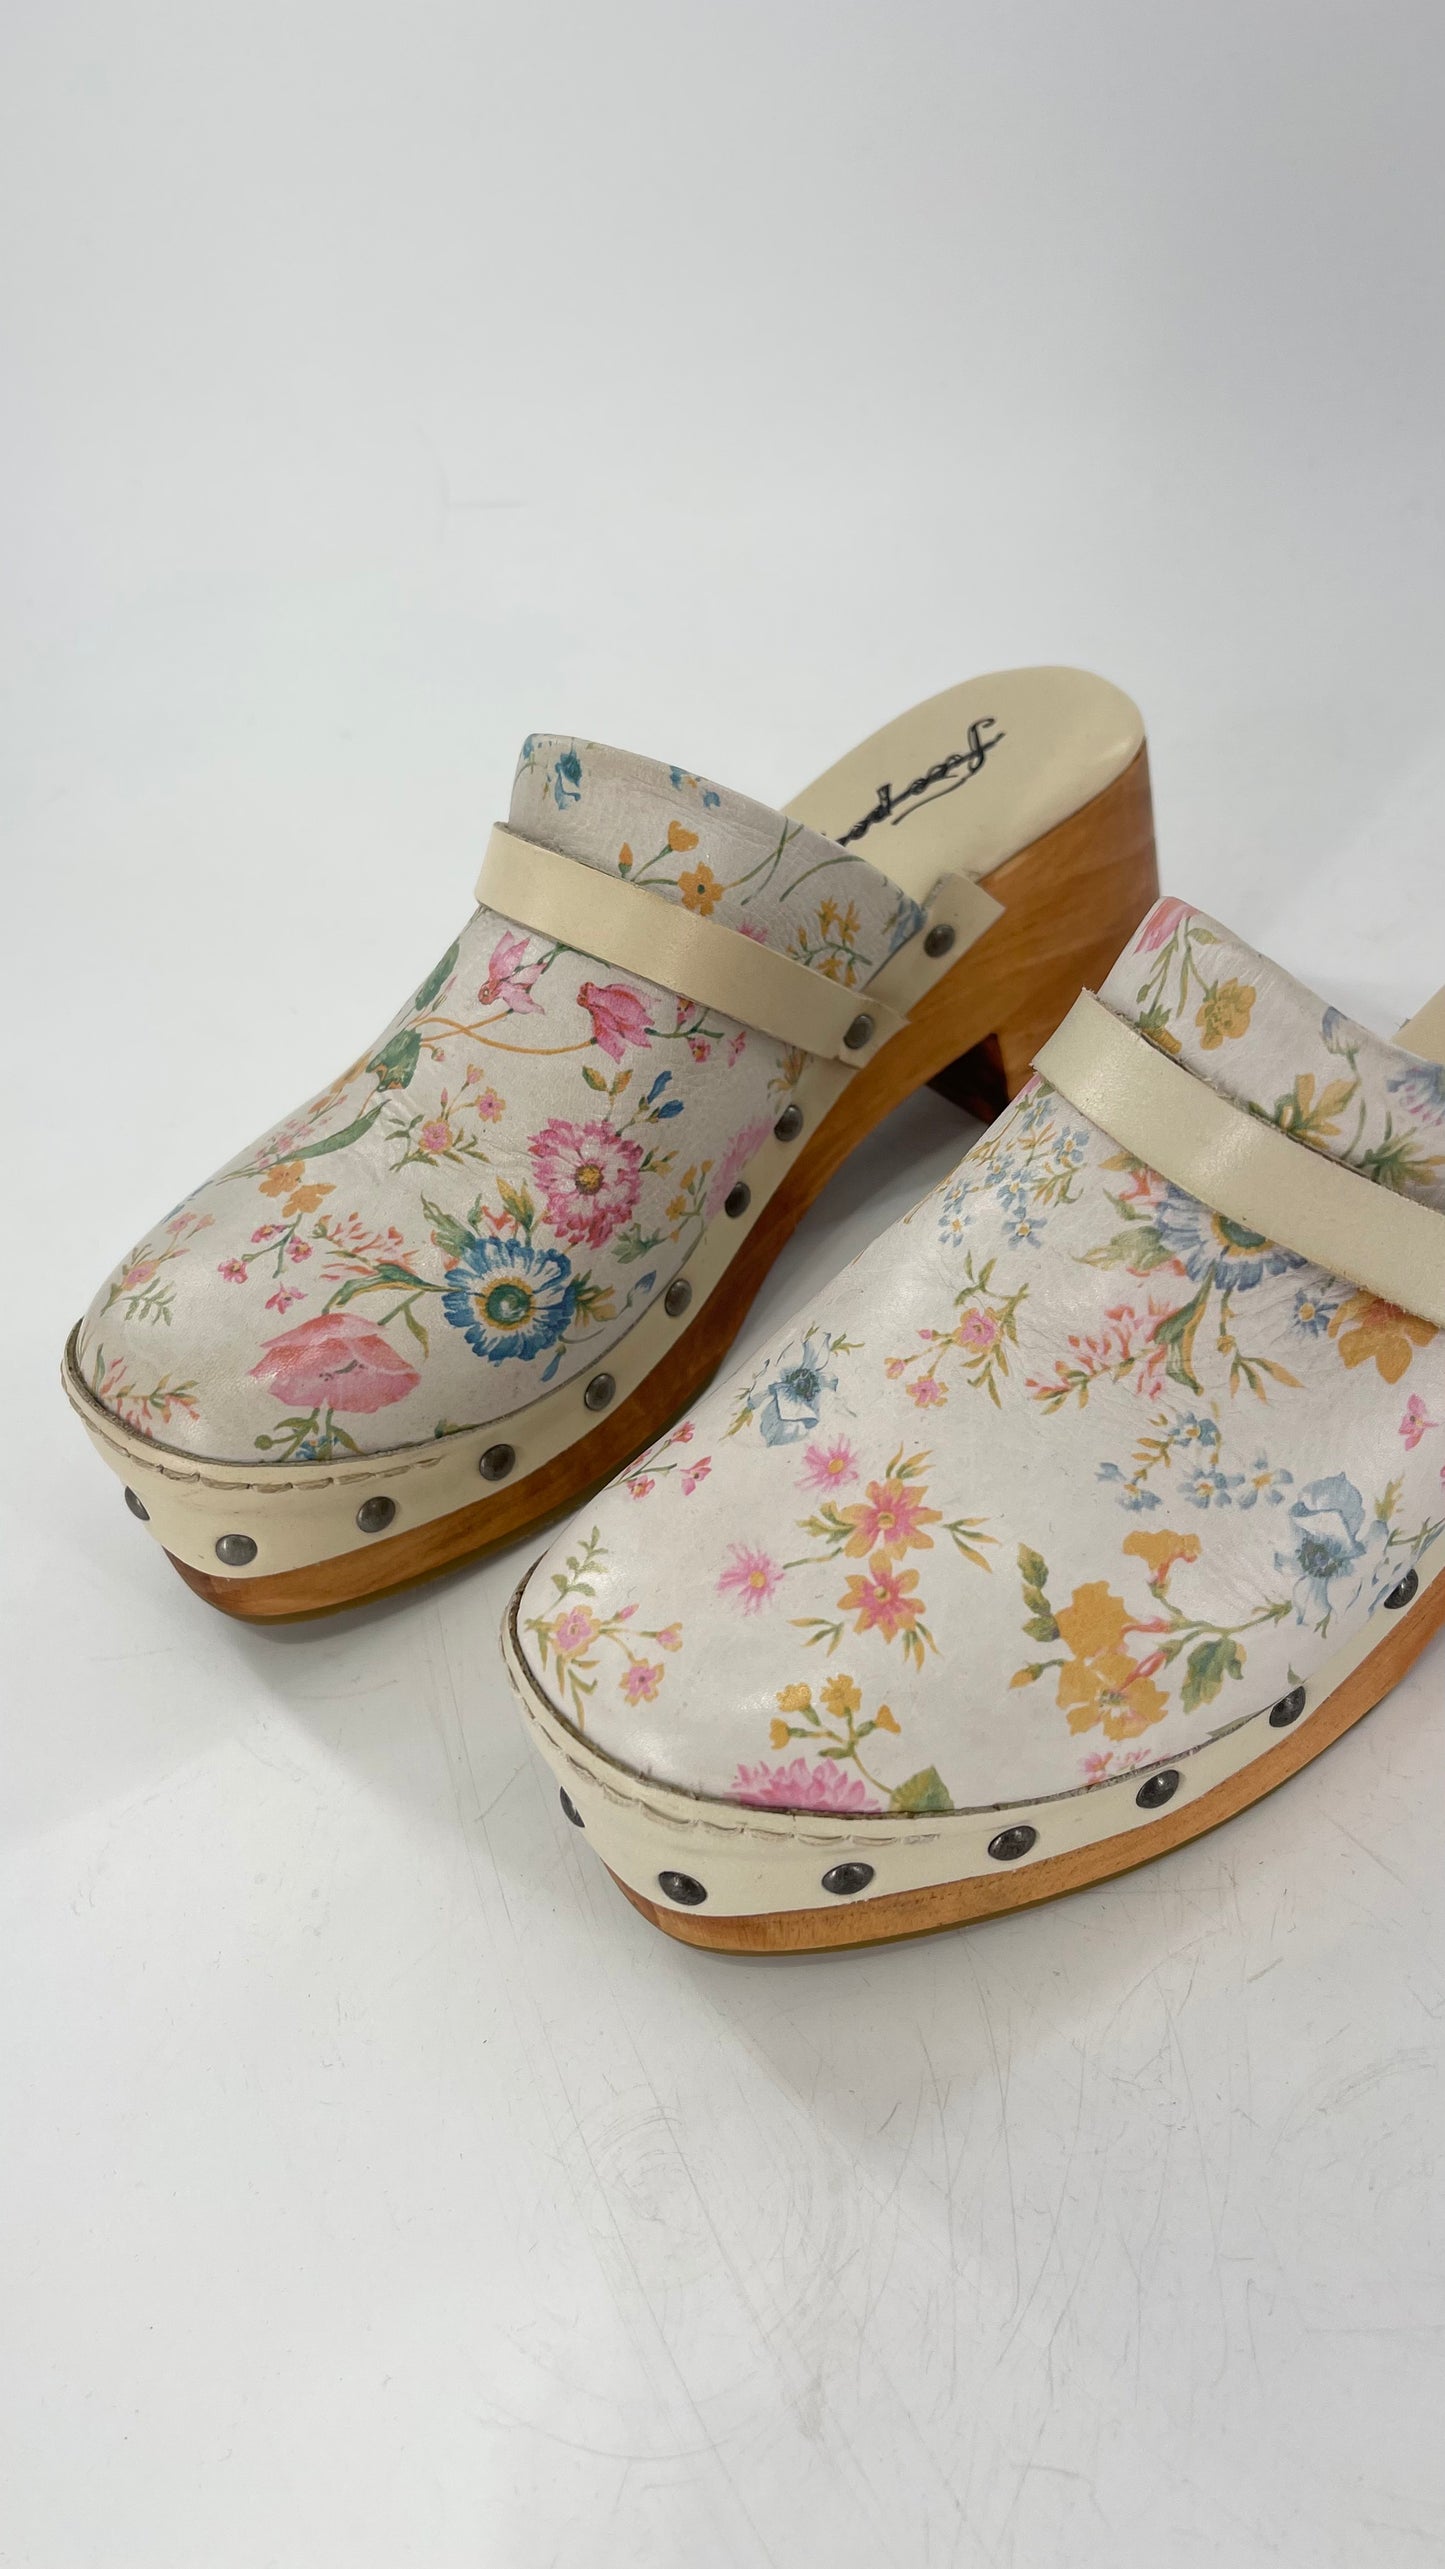 Free People Calabasas Off White Clogs with Floral Design (38)